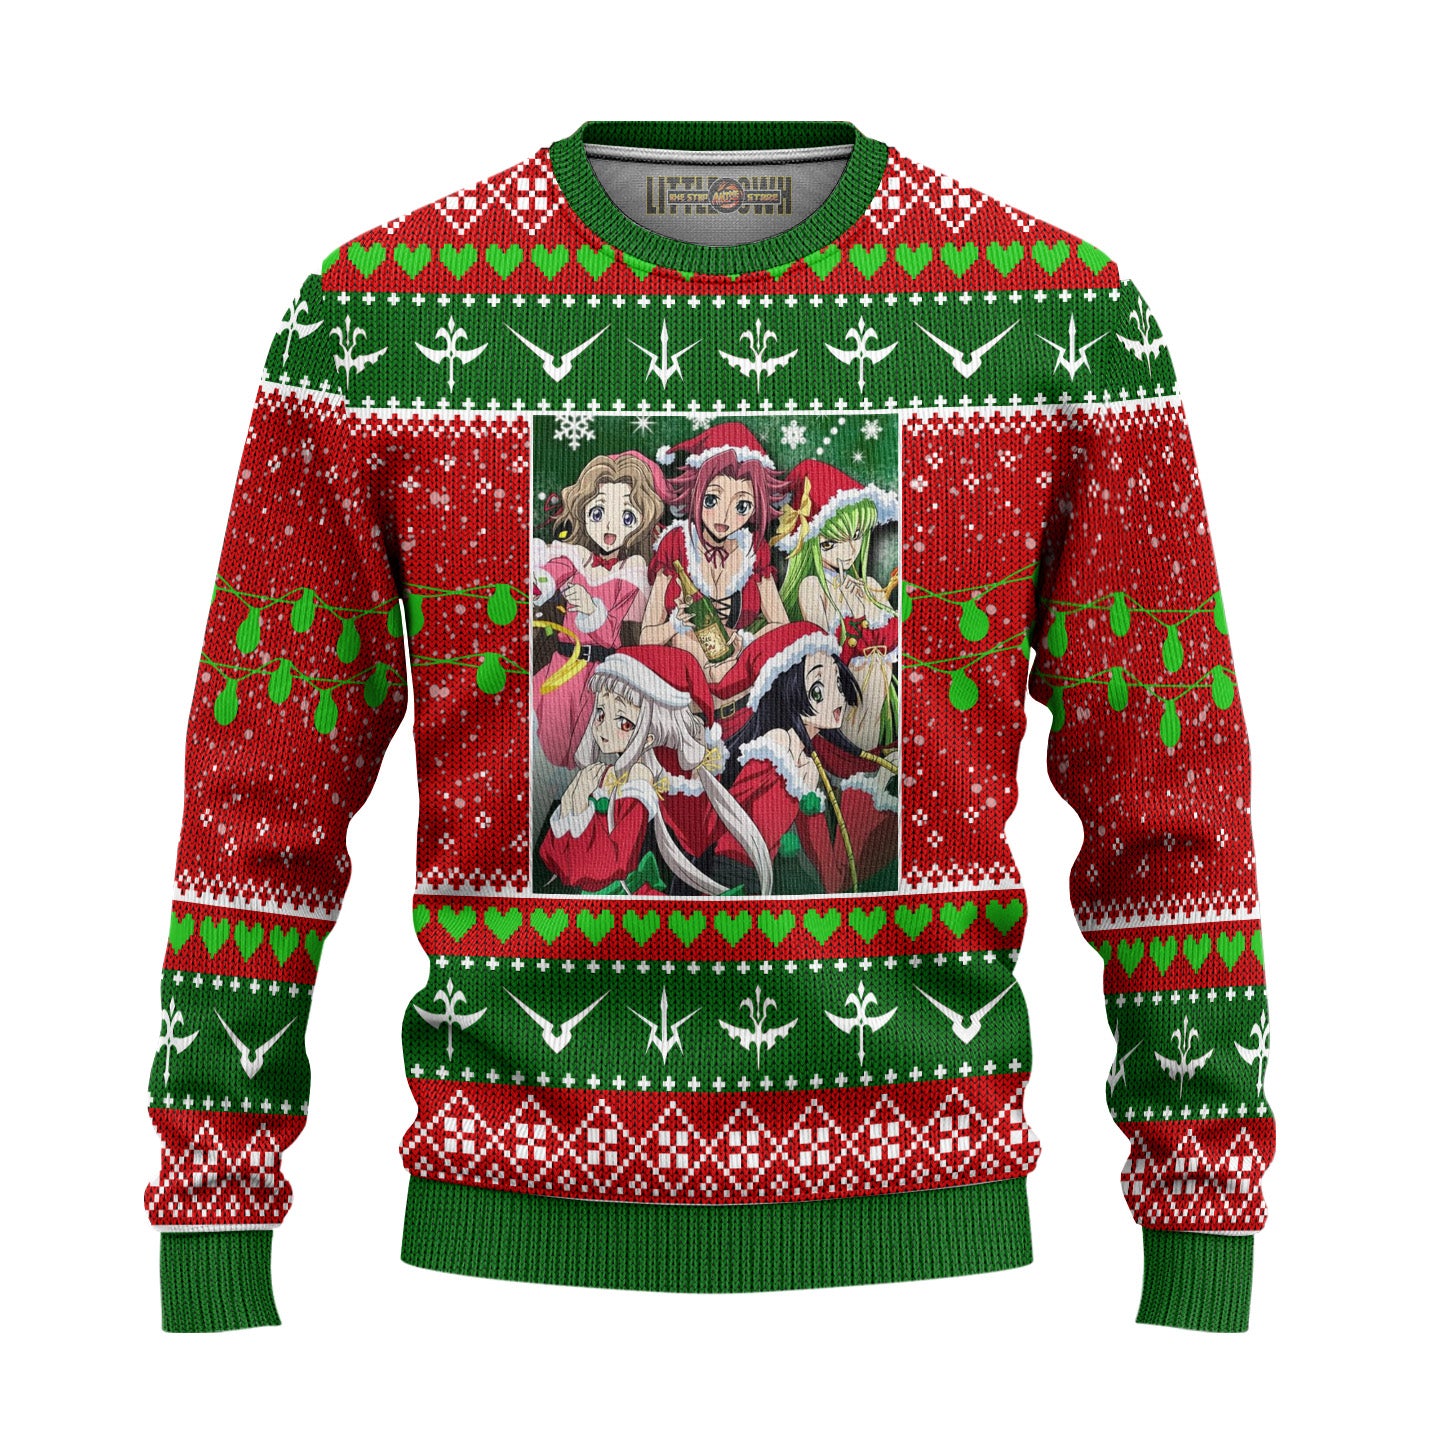 Code Geass Anime Ugly Christmas Sweater Custom Characters Gift For Fans